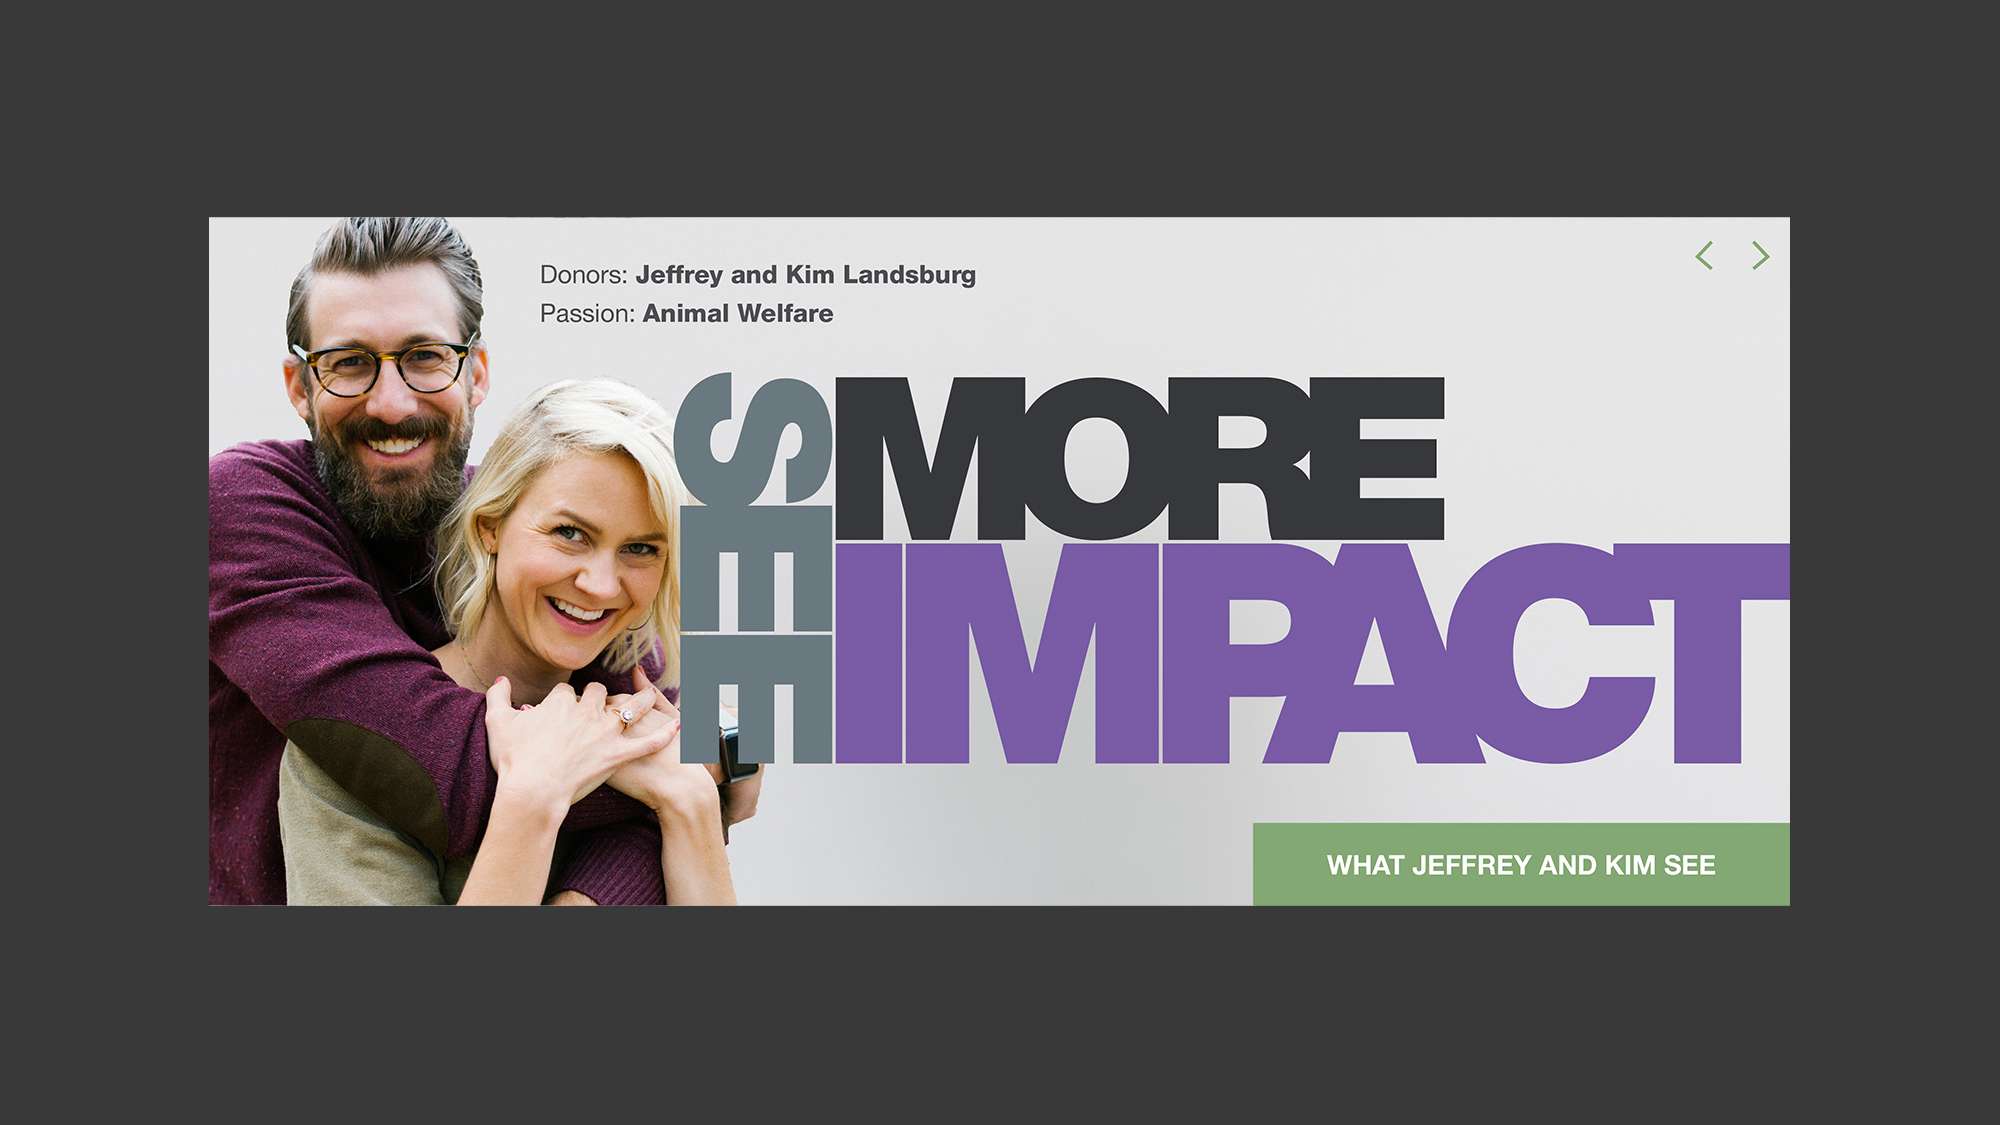 See more impact. Portrait of donors Jeffrey and Kim Landsburg.